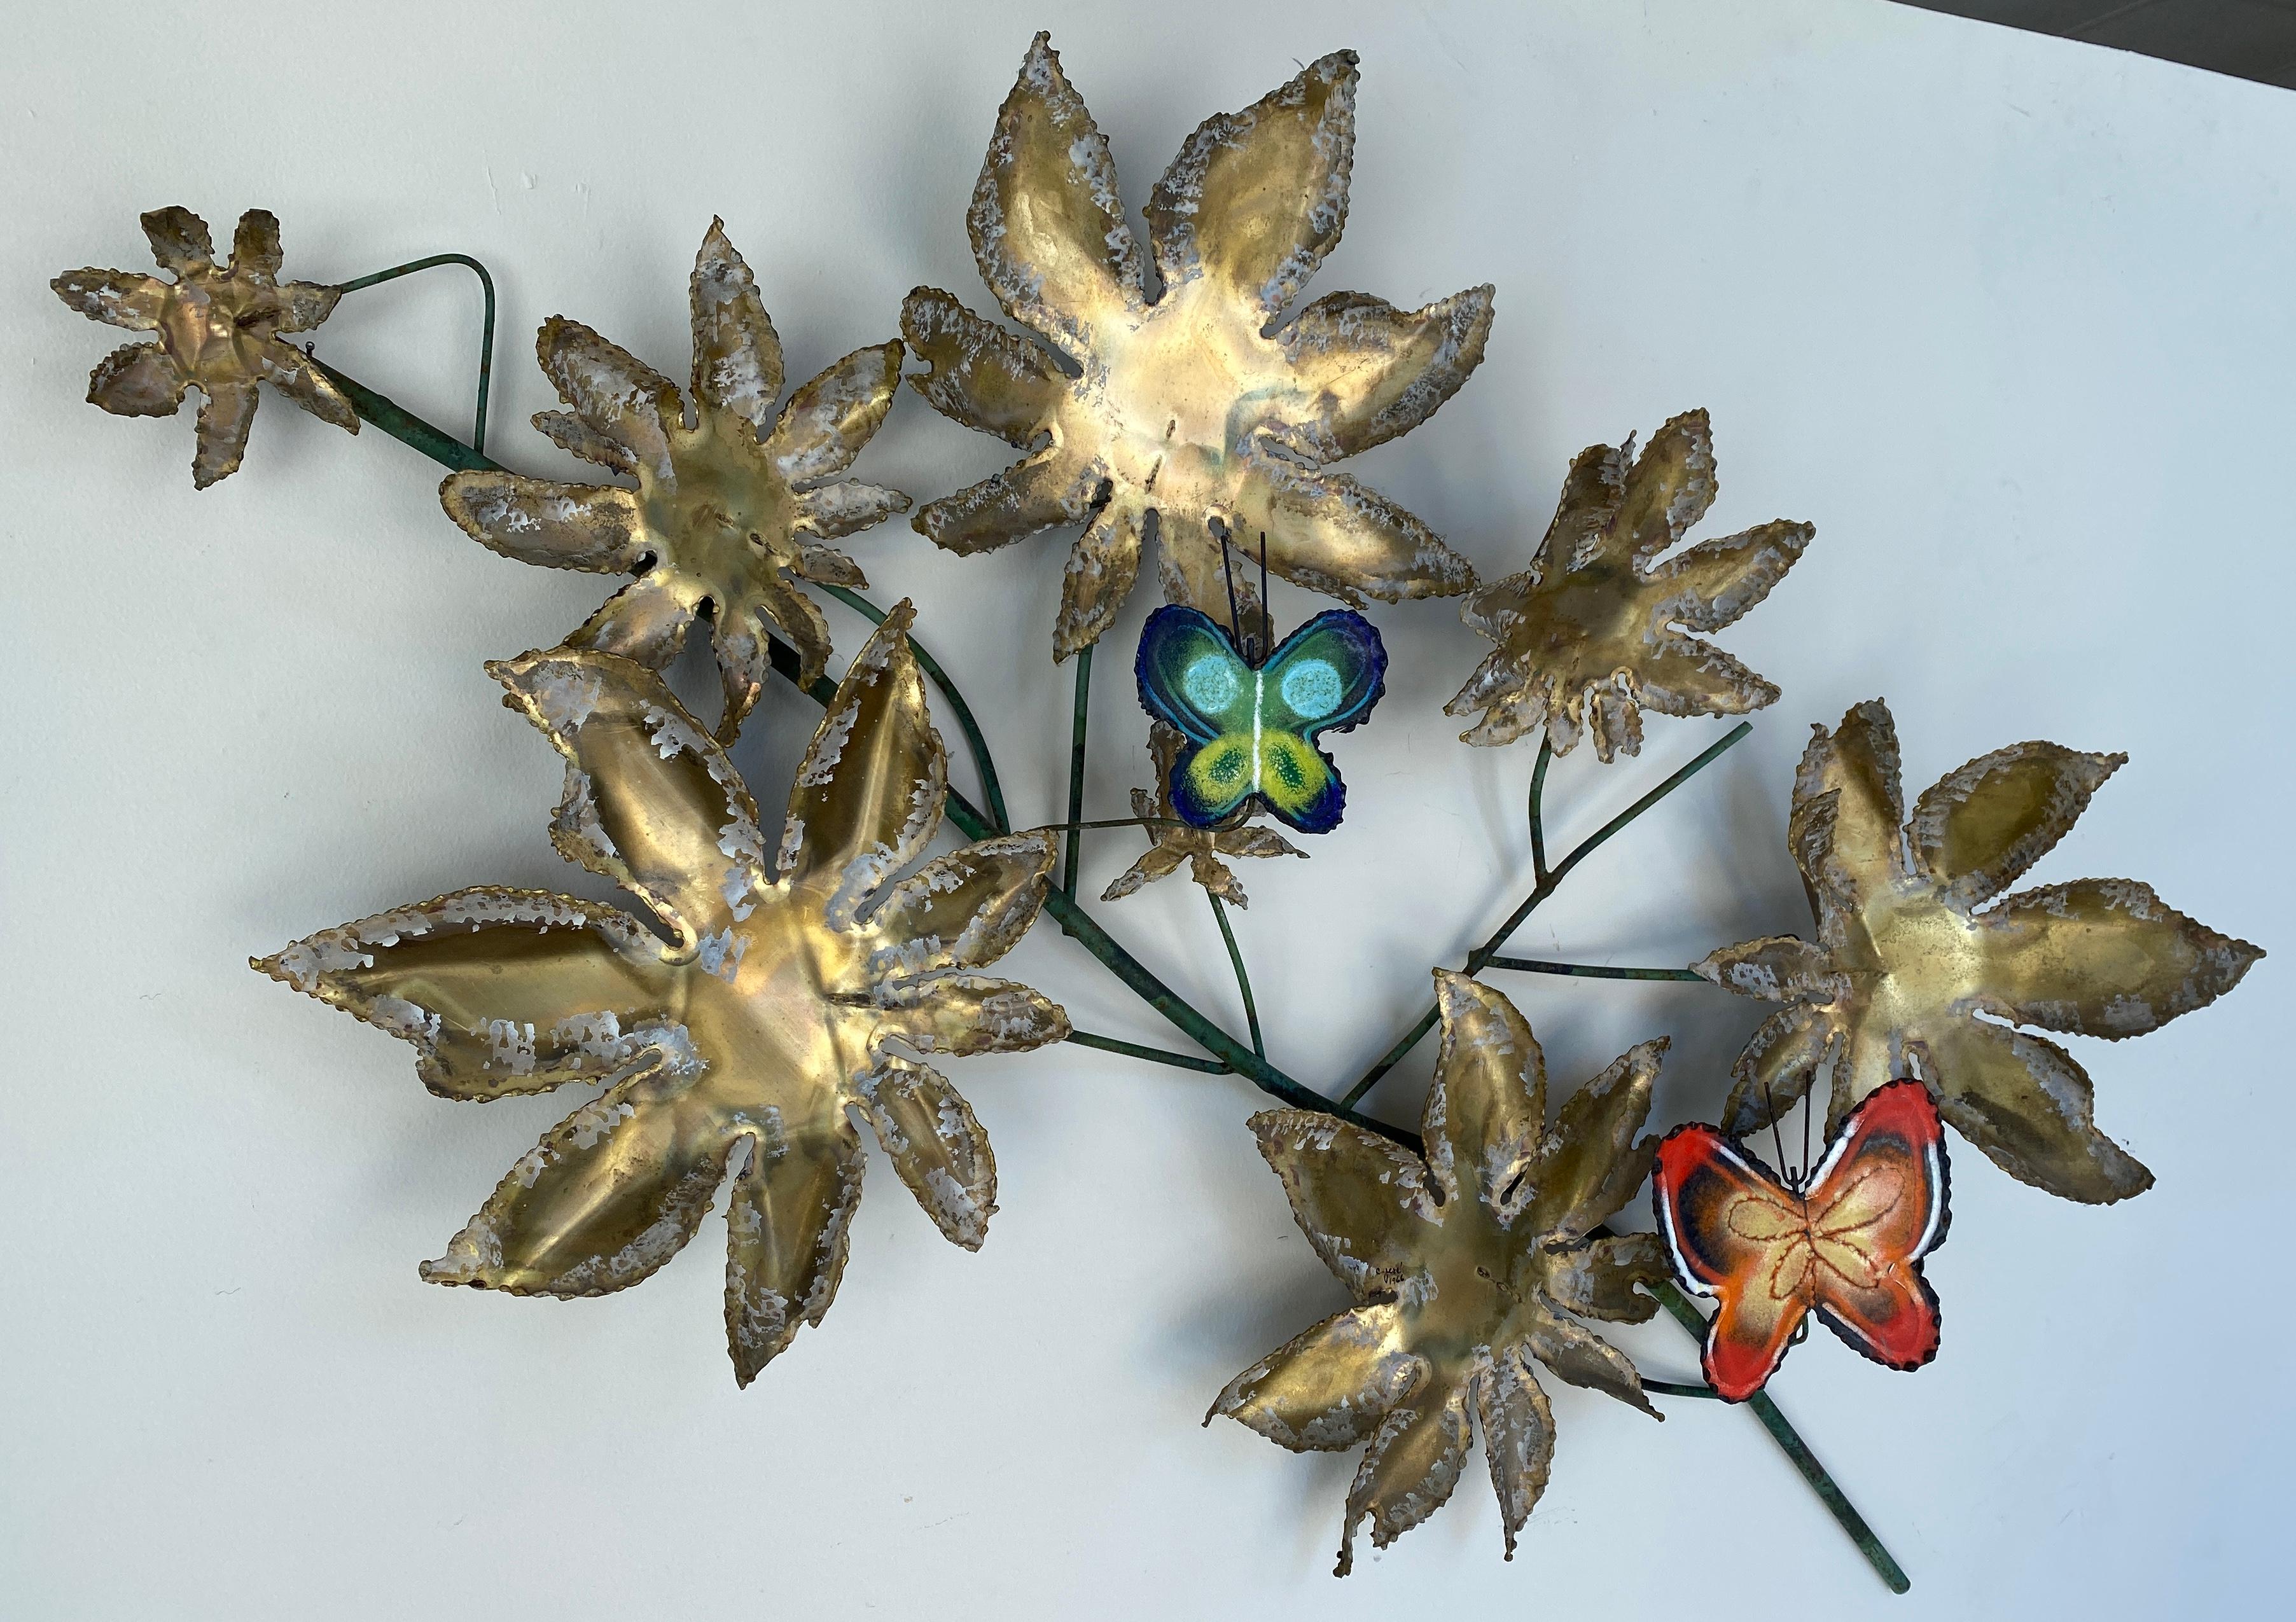 Offered here is a Curtis Jeré wall sculpture of butterflies on a tree branch for Artisan House.
Two butterflies, one mostly red enamel, with the other mostly blue enamel, with about 7 leaves of
different sizes surrounding them, branches holding